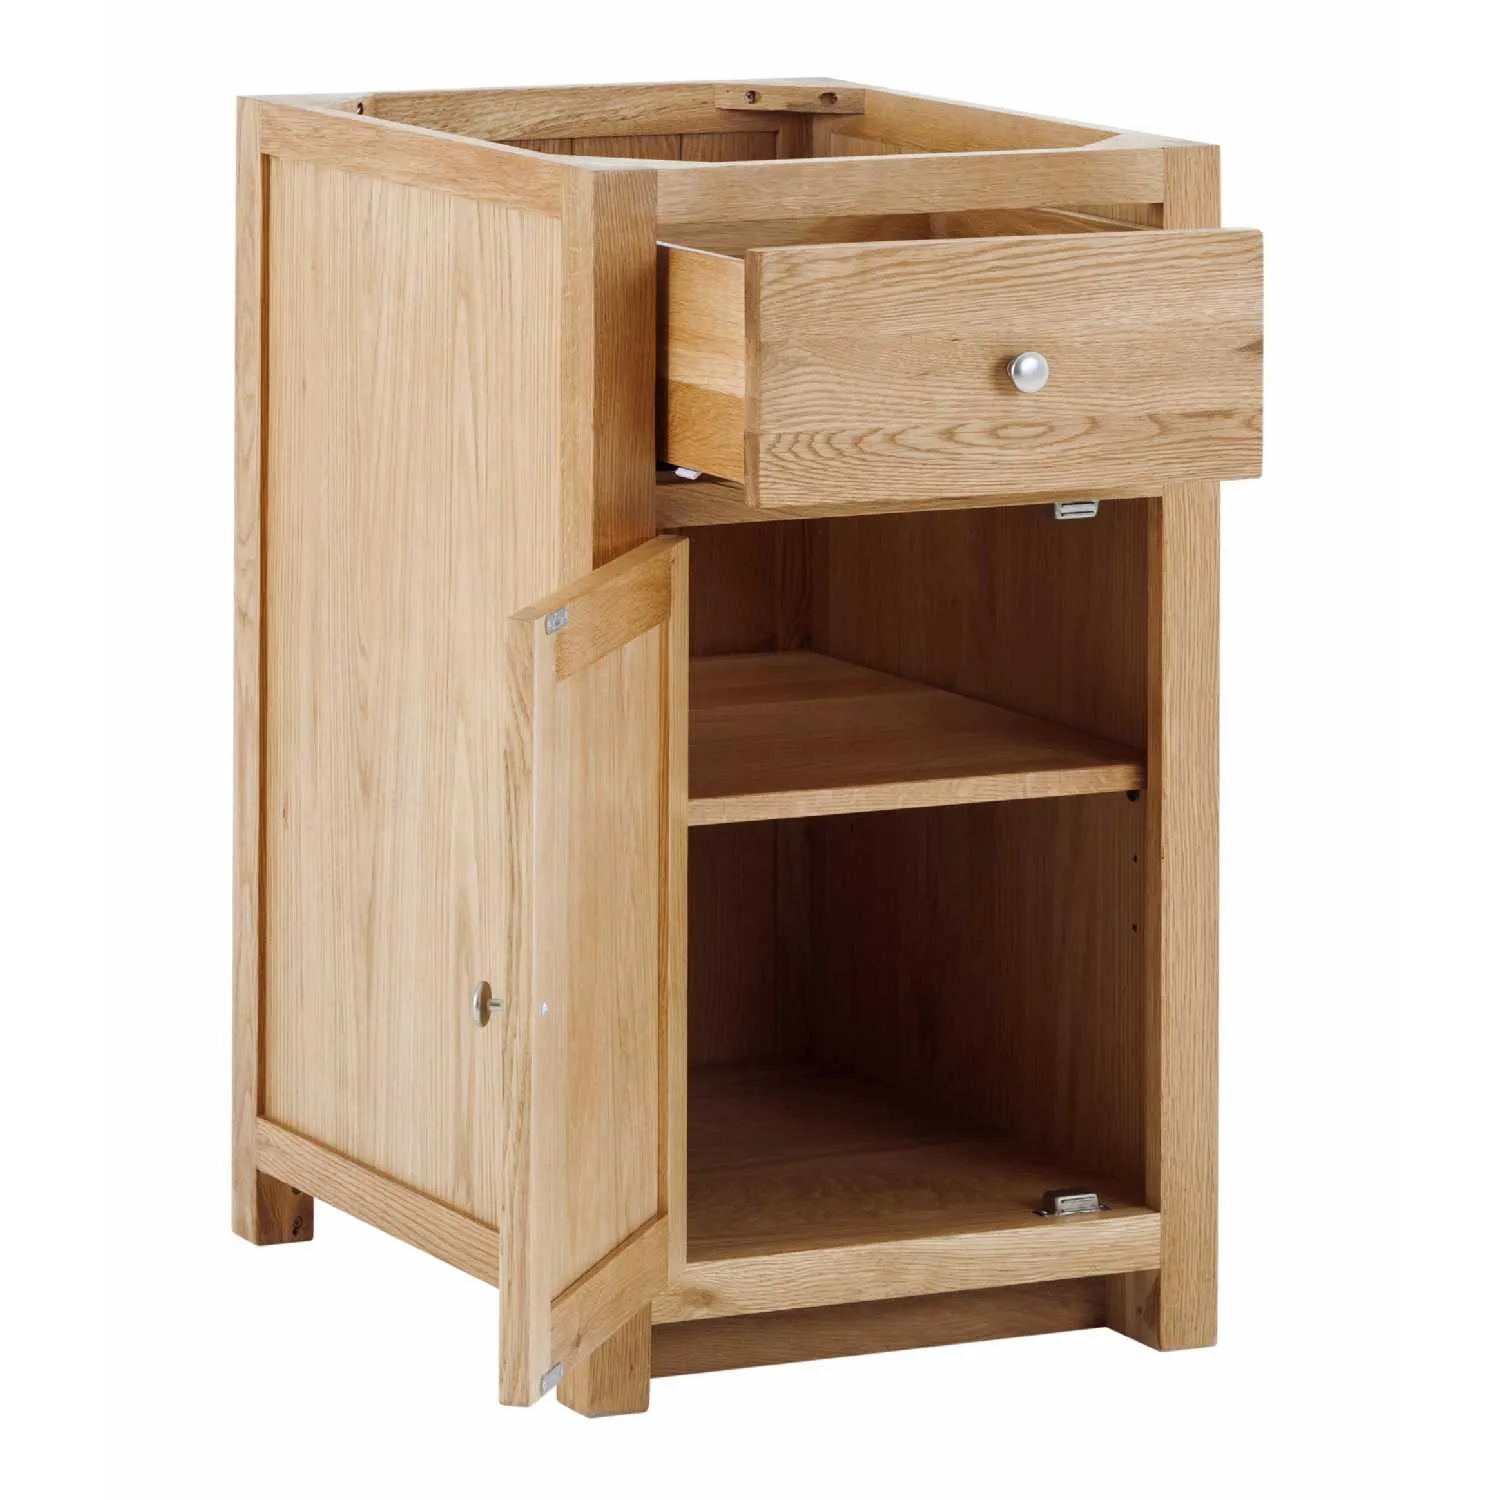 Handmade Oak Kitchens Left 1 Door 1 Drawer Cabinet With soft close drawers